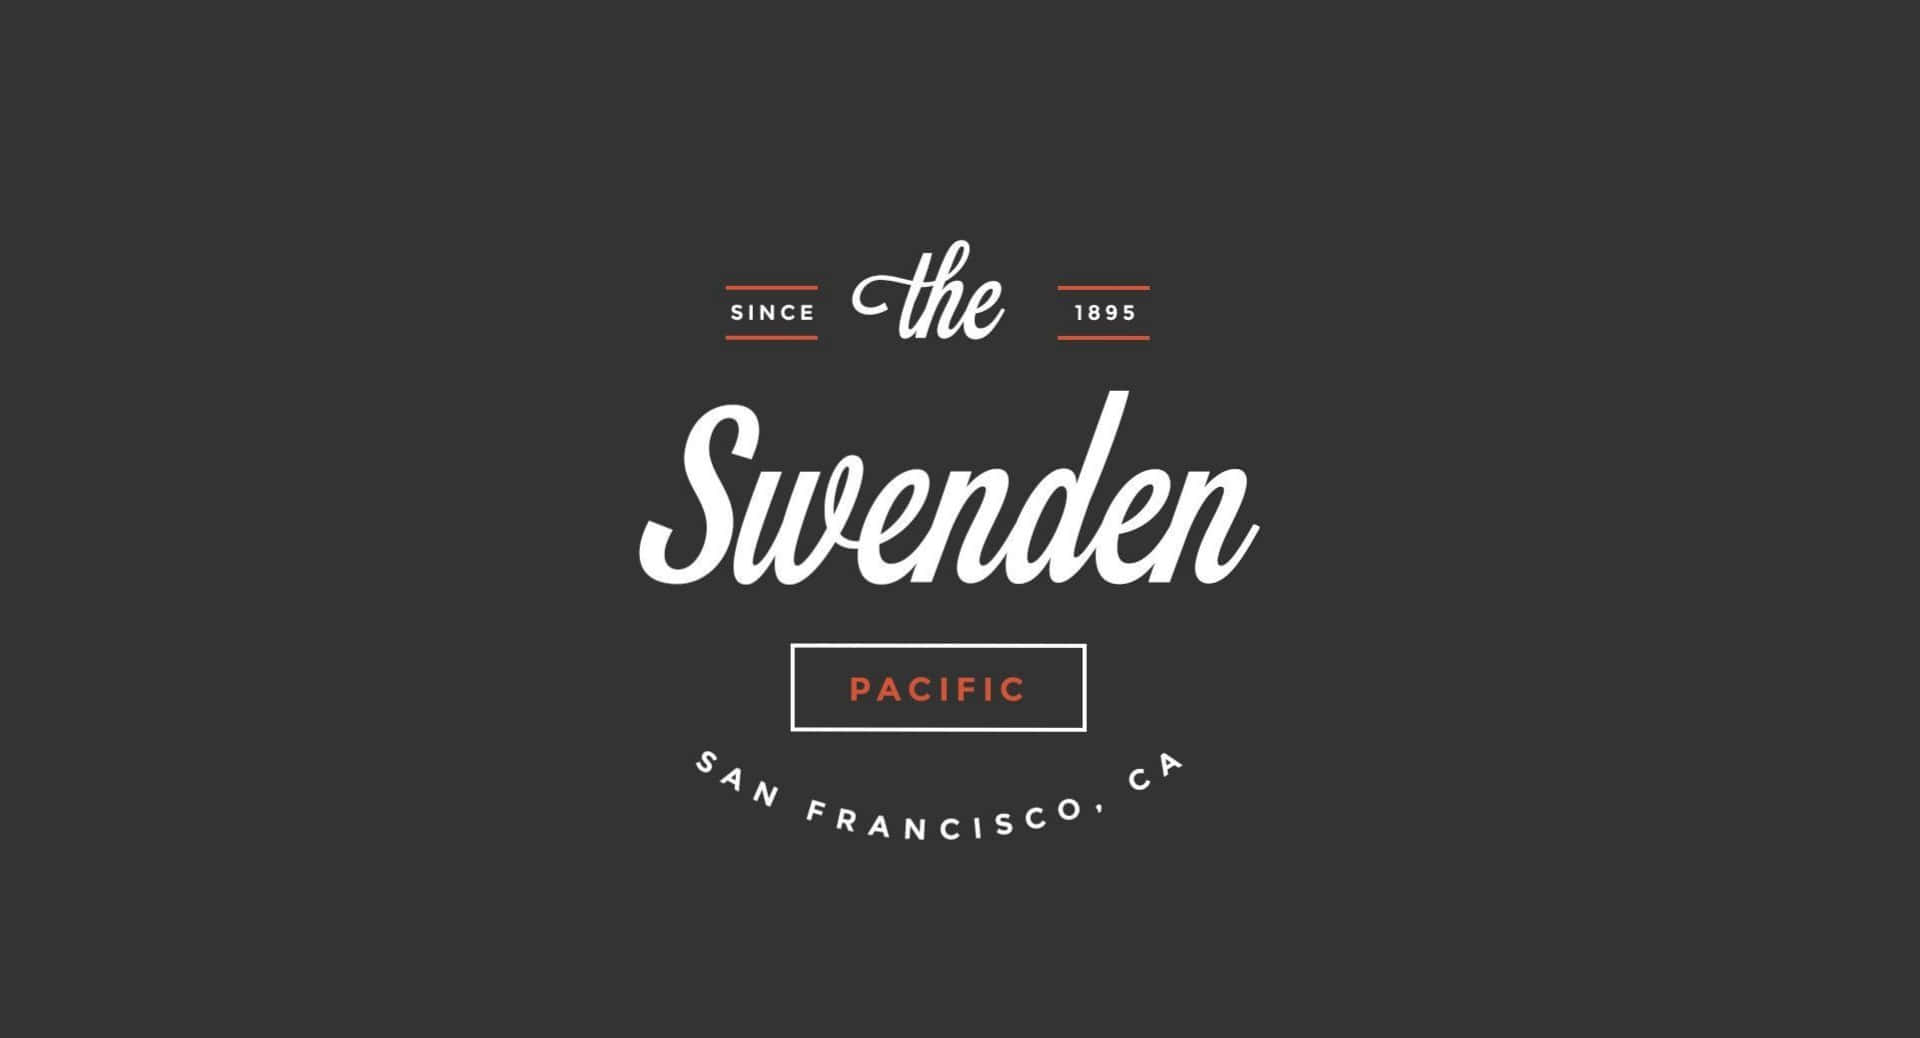 The Sweden Pacific Logo On A Black Background Wallpaper